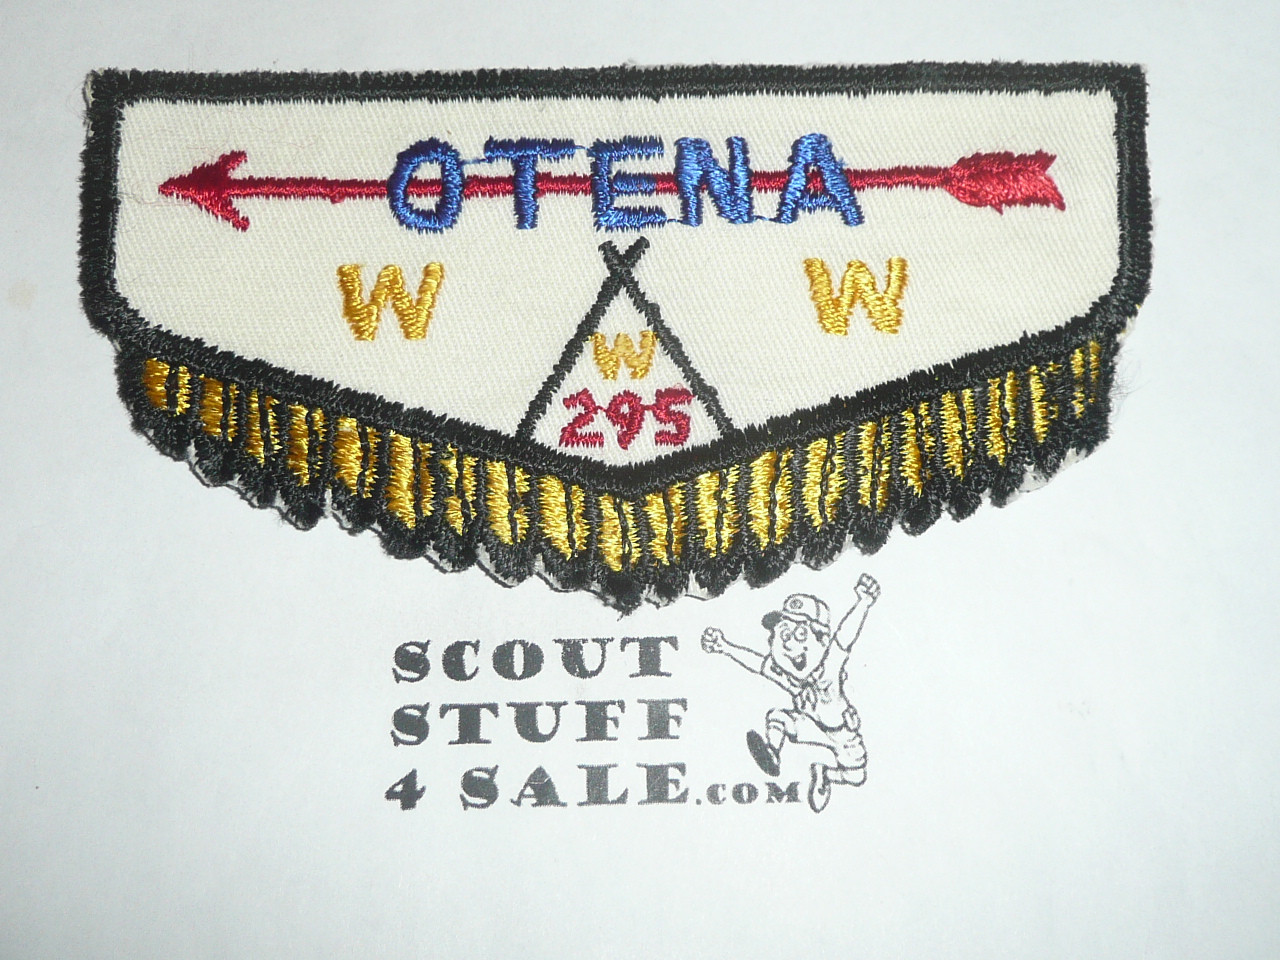 Order of the Arrow Lodge #295 Otena f1d First Flap Patch